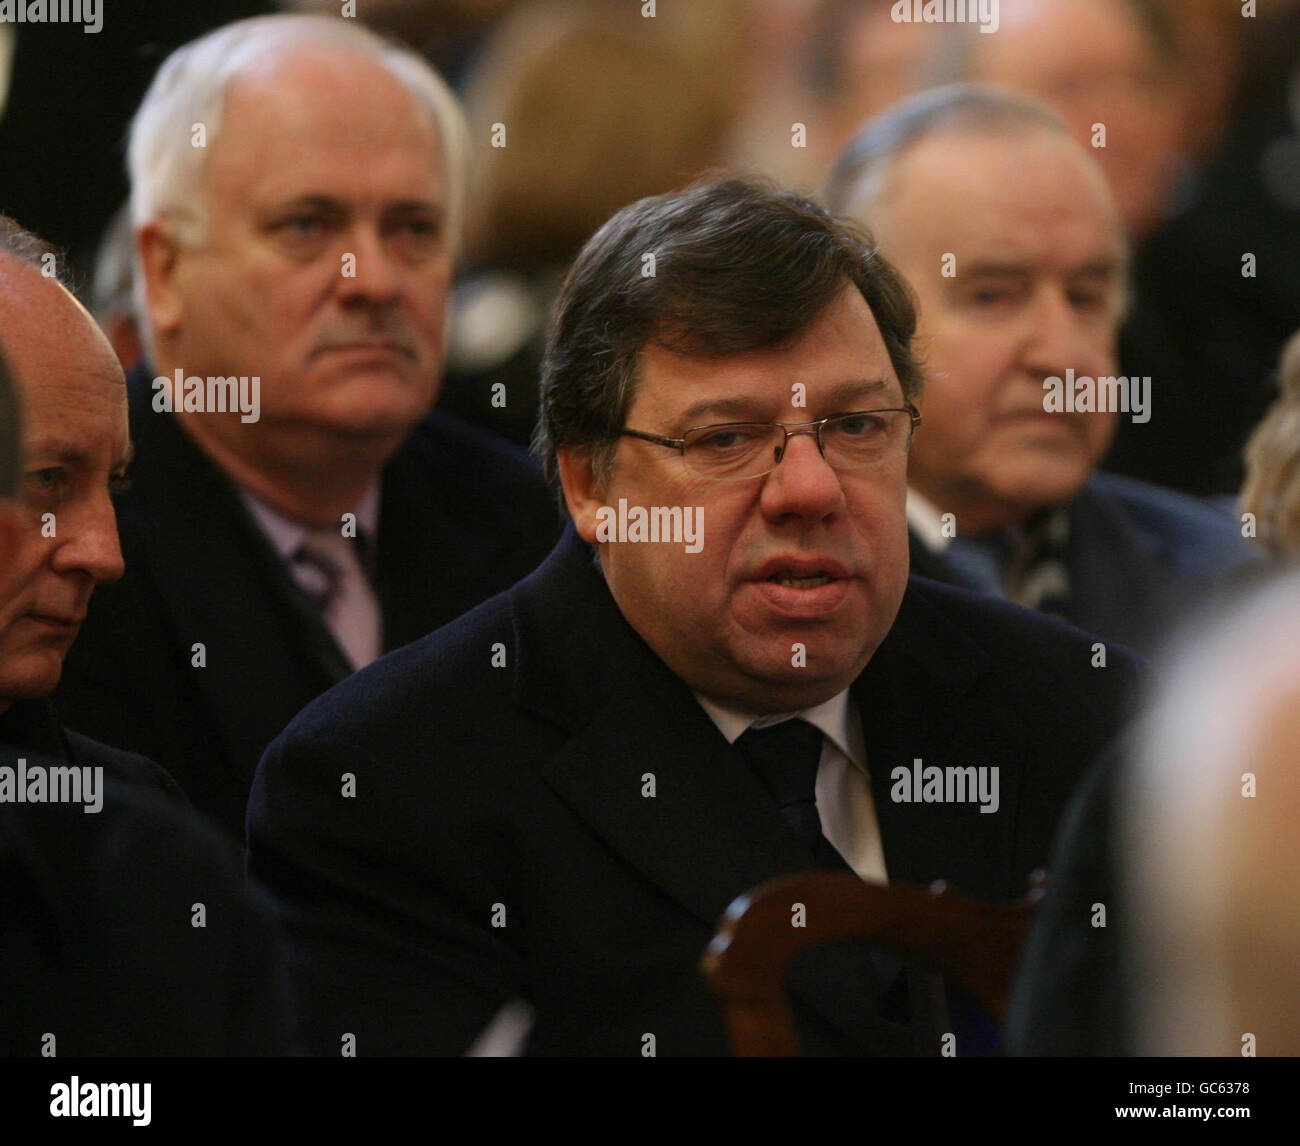 (Left to right) former Taoiseach John Bruton, Taoiseach Brian Cowen and former Taoiseach Albert Reynolds attend the funeral of Cardinal Cahal Daly, former Catholic Primate of all Ireland, at St Patrick's Cathedral in Armagh. Stock Photo